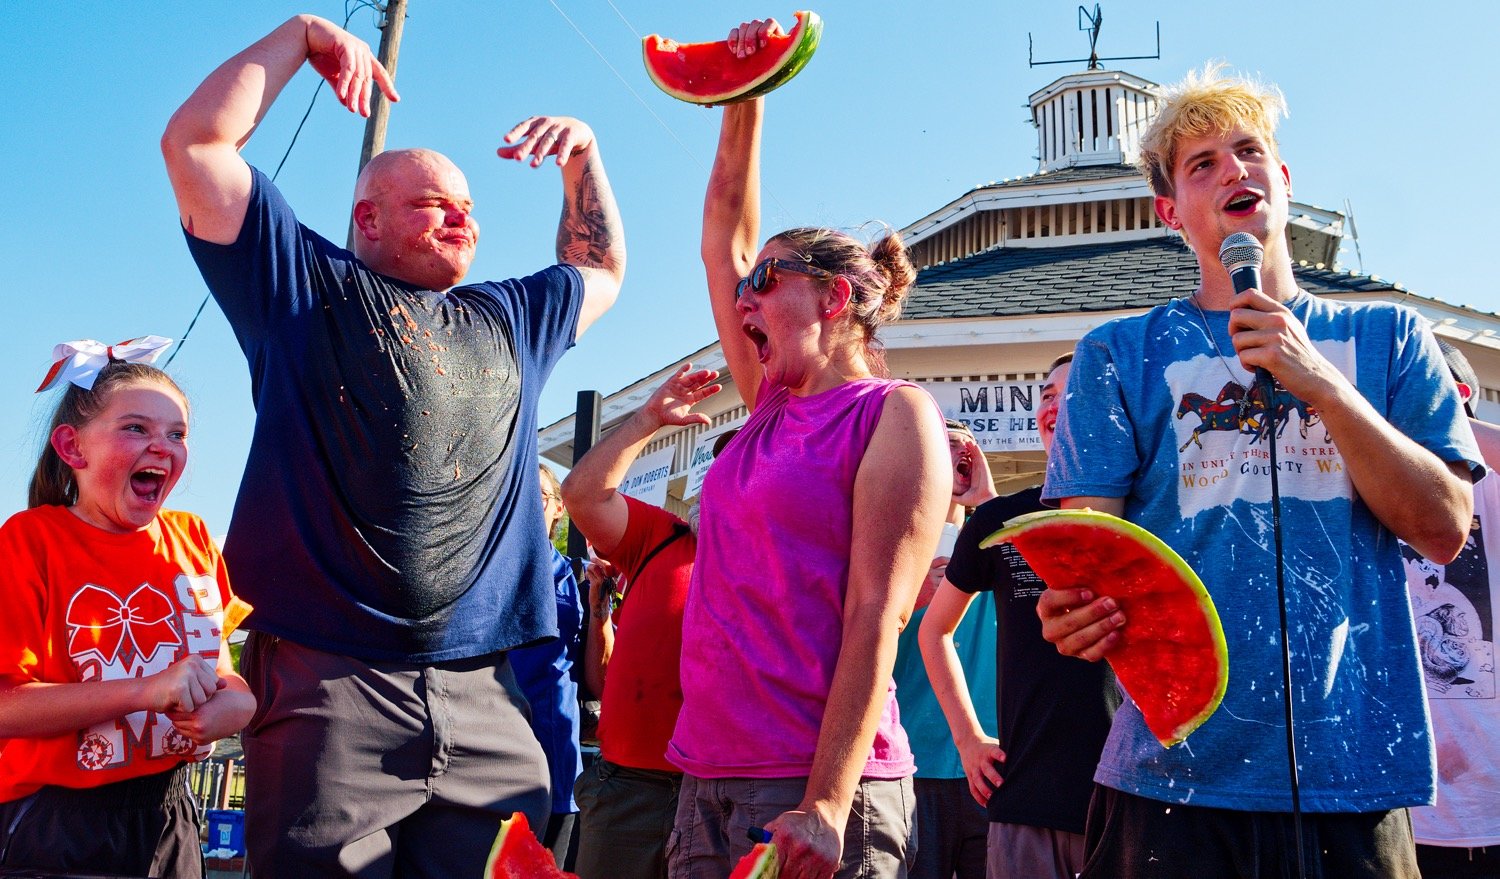 Josh Davis defended his title in the adult division of the watermelon eating contest. [additional iron horse images available]